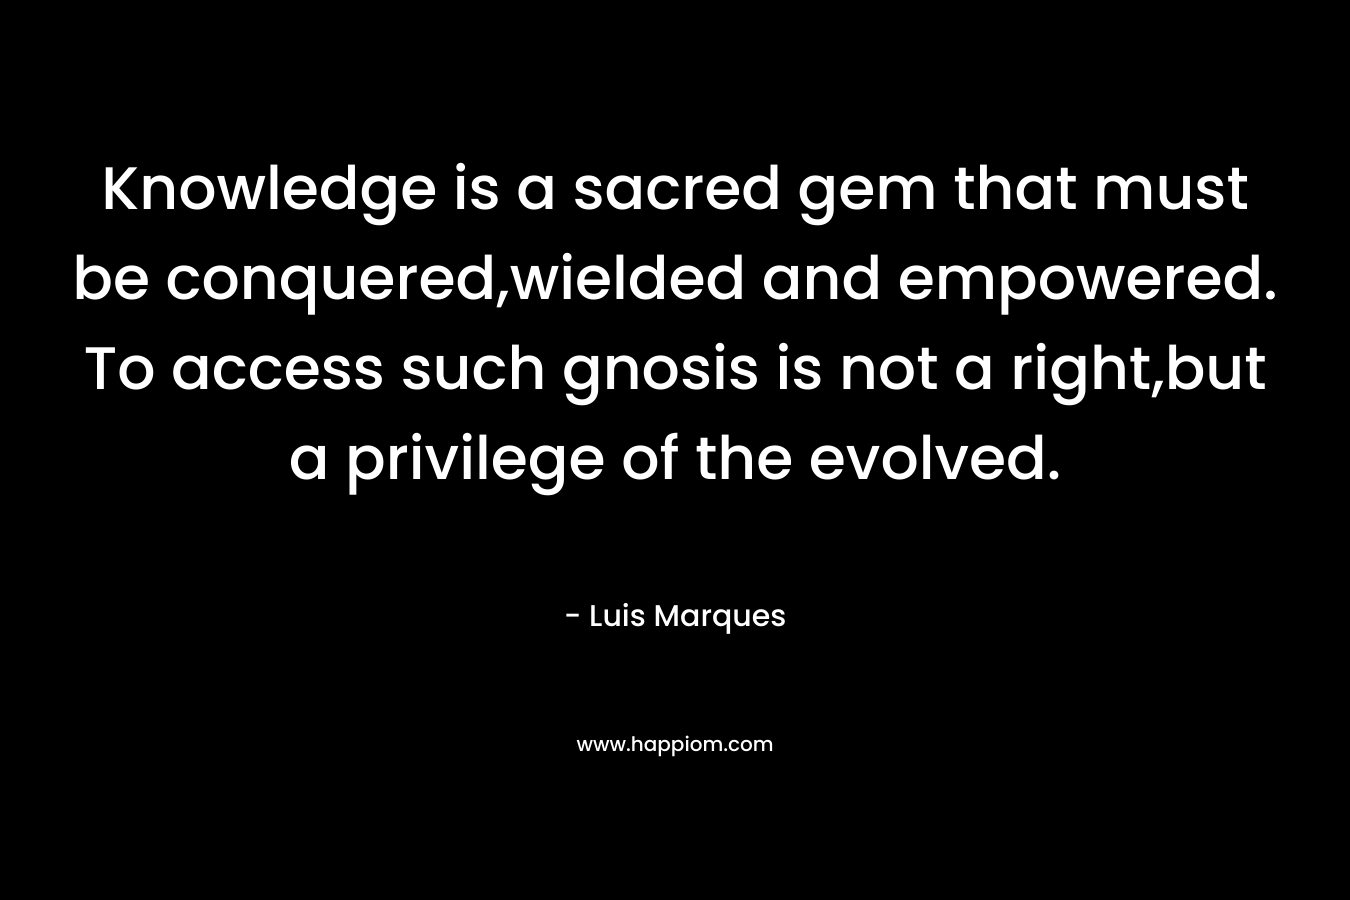 Knowledge is a sacred gem that must be conquered,wielded and empowered. To access such gnosis is not a right,but a privilege of the evolved.